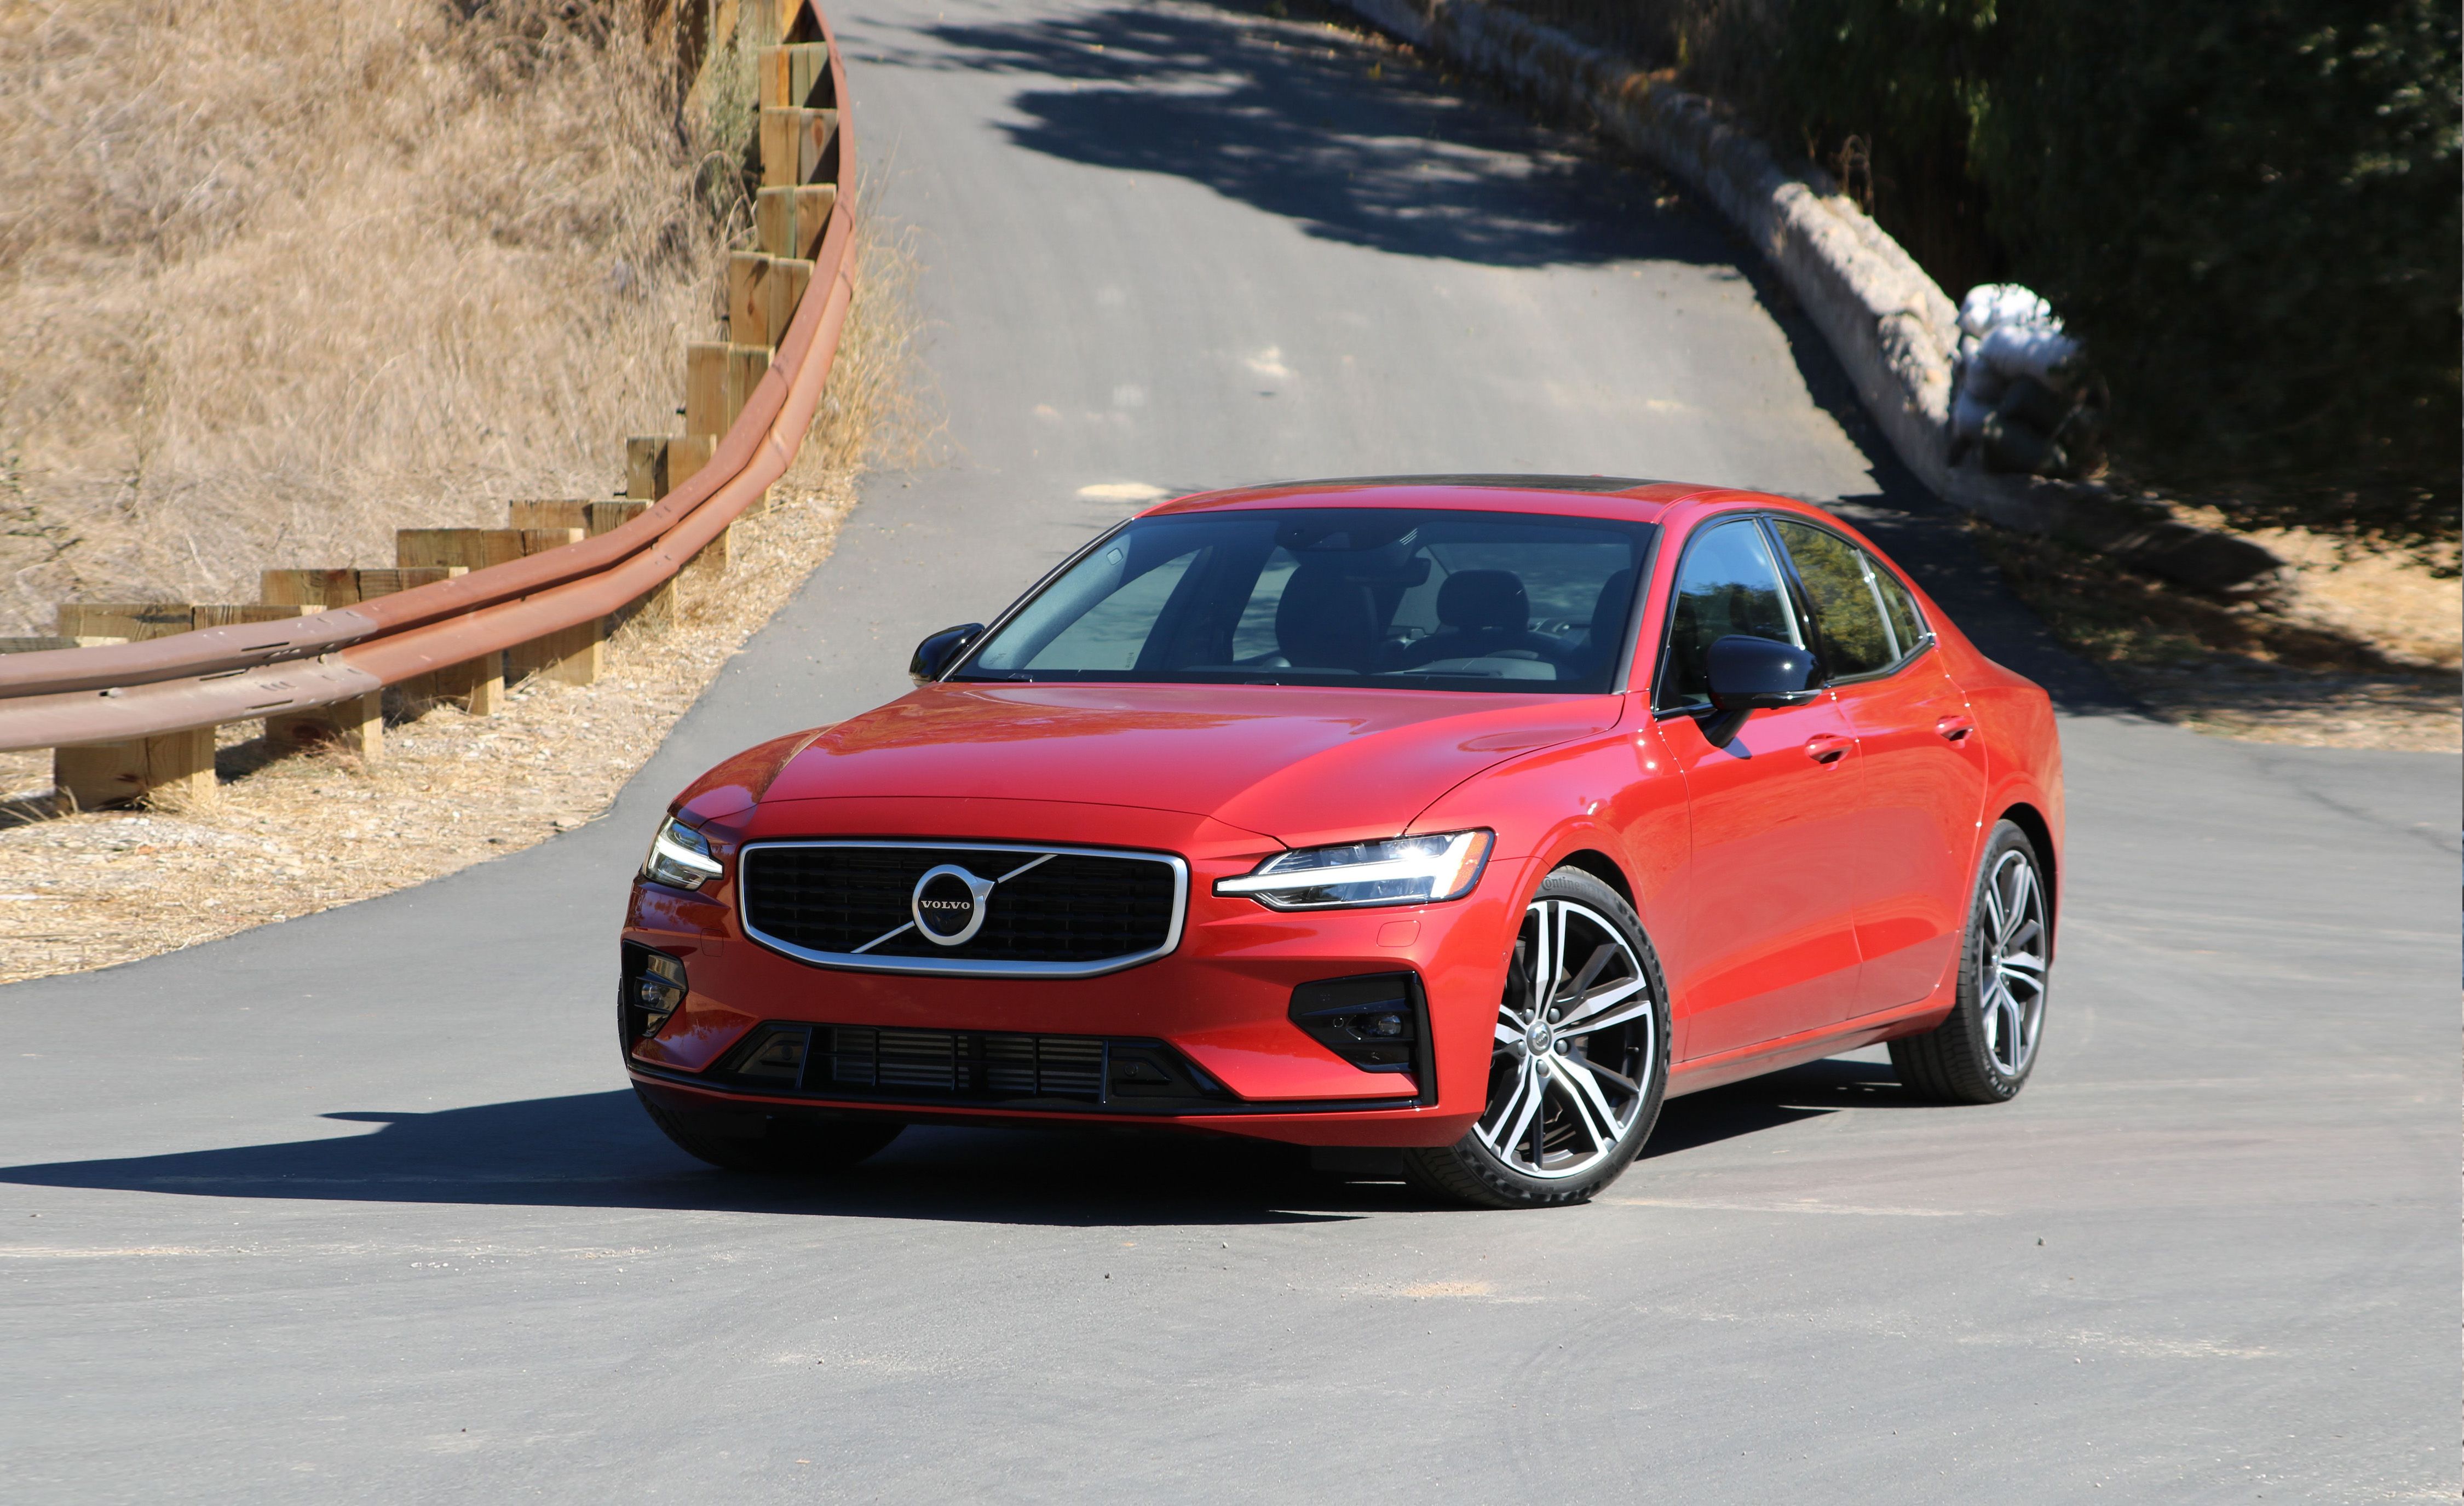 2019 Volvo S60 Reviews | Volvo S60 Price, Photos, and Specs | Car and ...